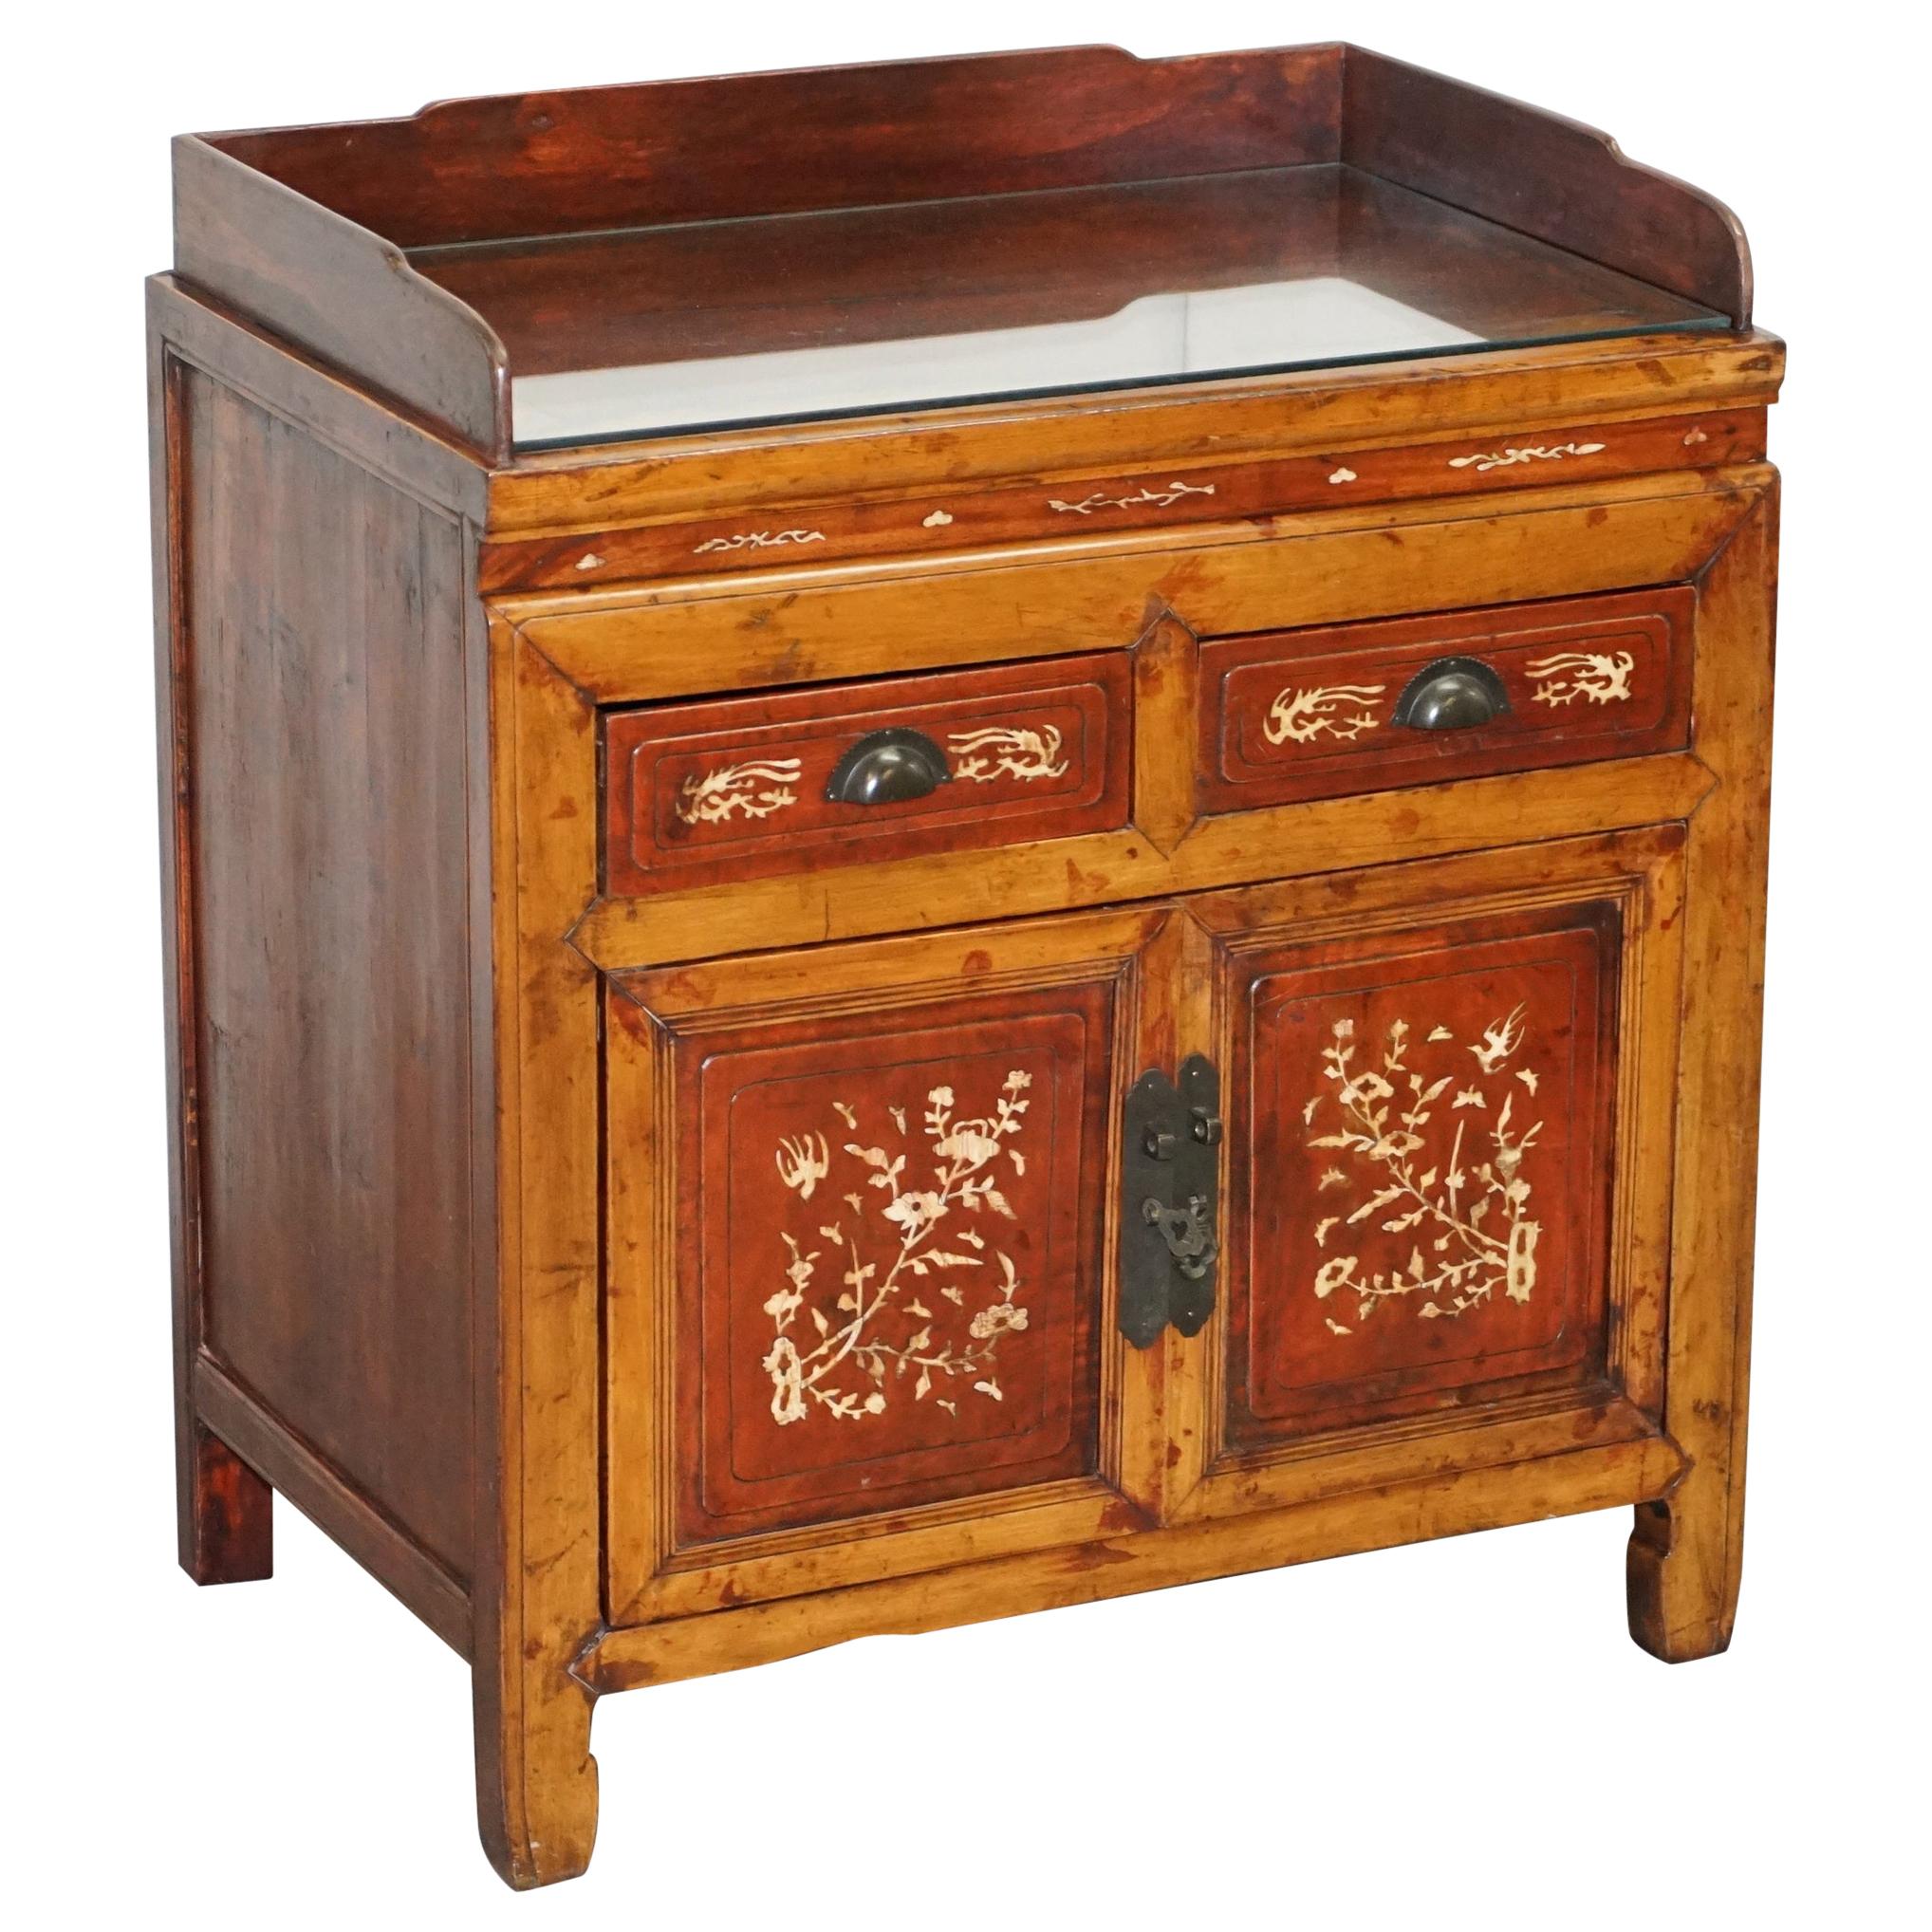 Antique Chinese Export circa 1900 Redwood Lacquered Inlaid Wash Stand Sideboard For Sale